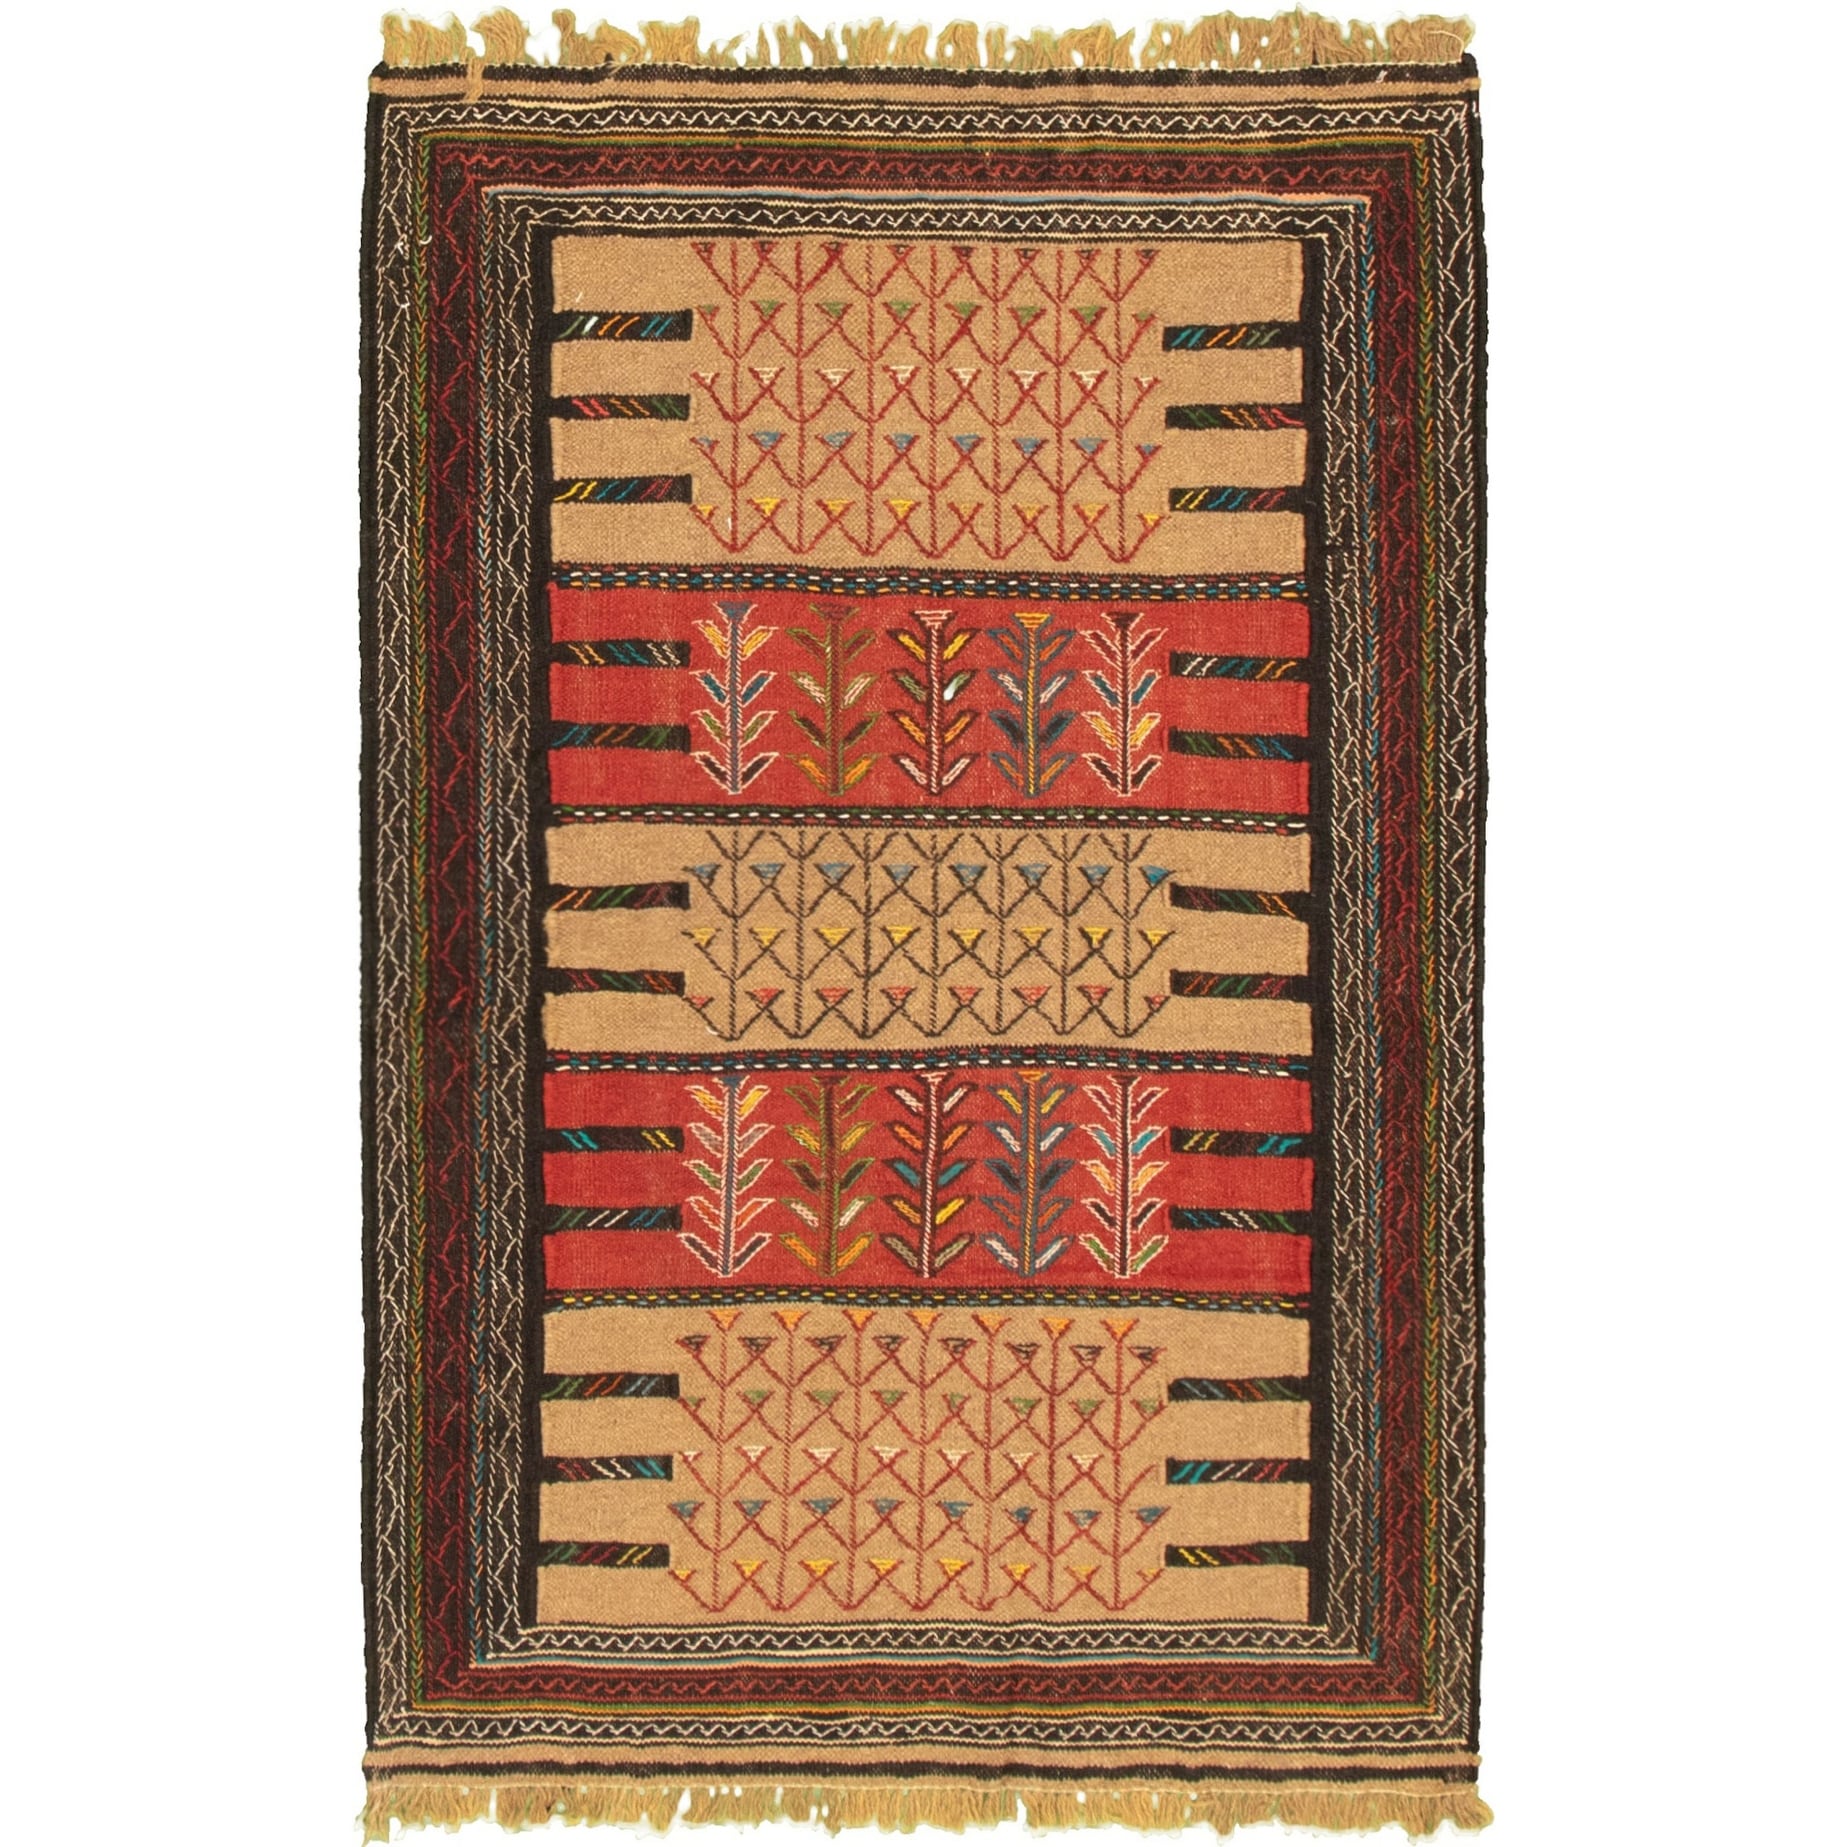 Ottoman Natura Bordered Brown Kilim 3'9 x 5'11 321451 Bedroom eCarpet Gallery Area Rug for Living Room Hand-Knotted Wool Rug 